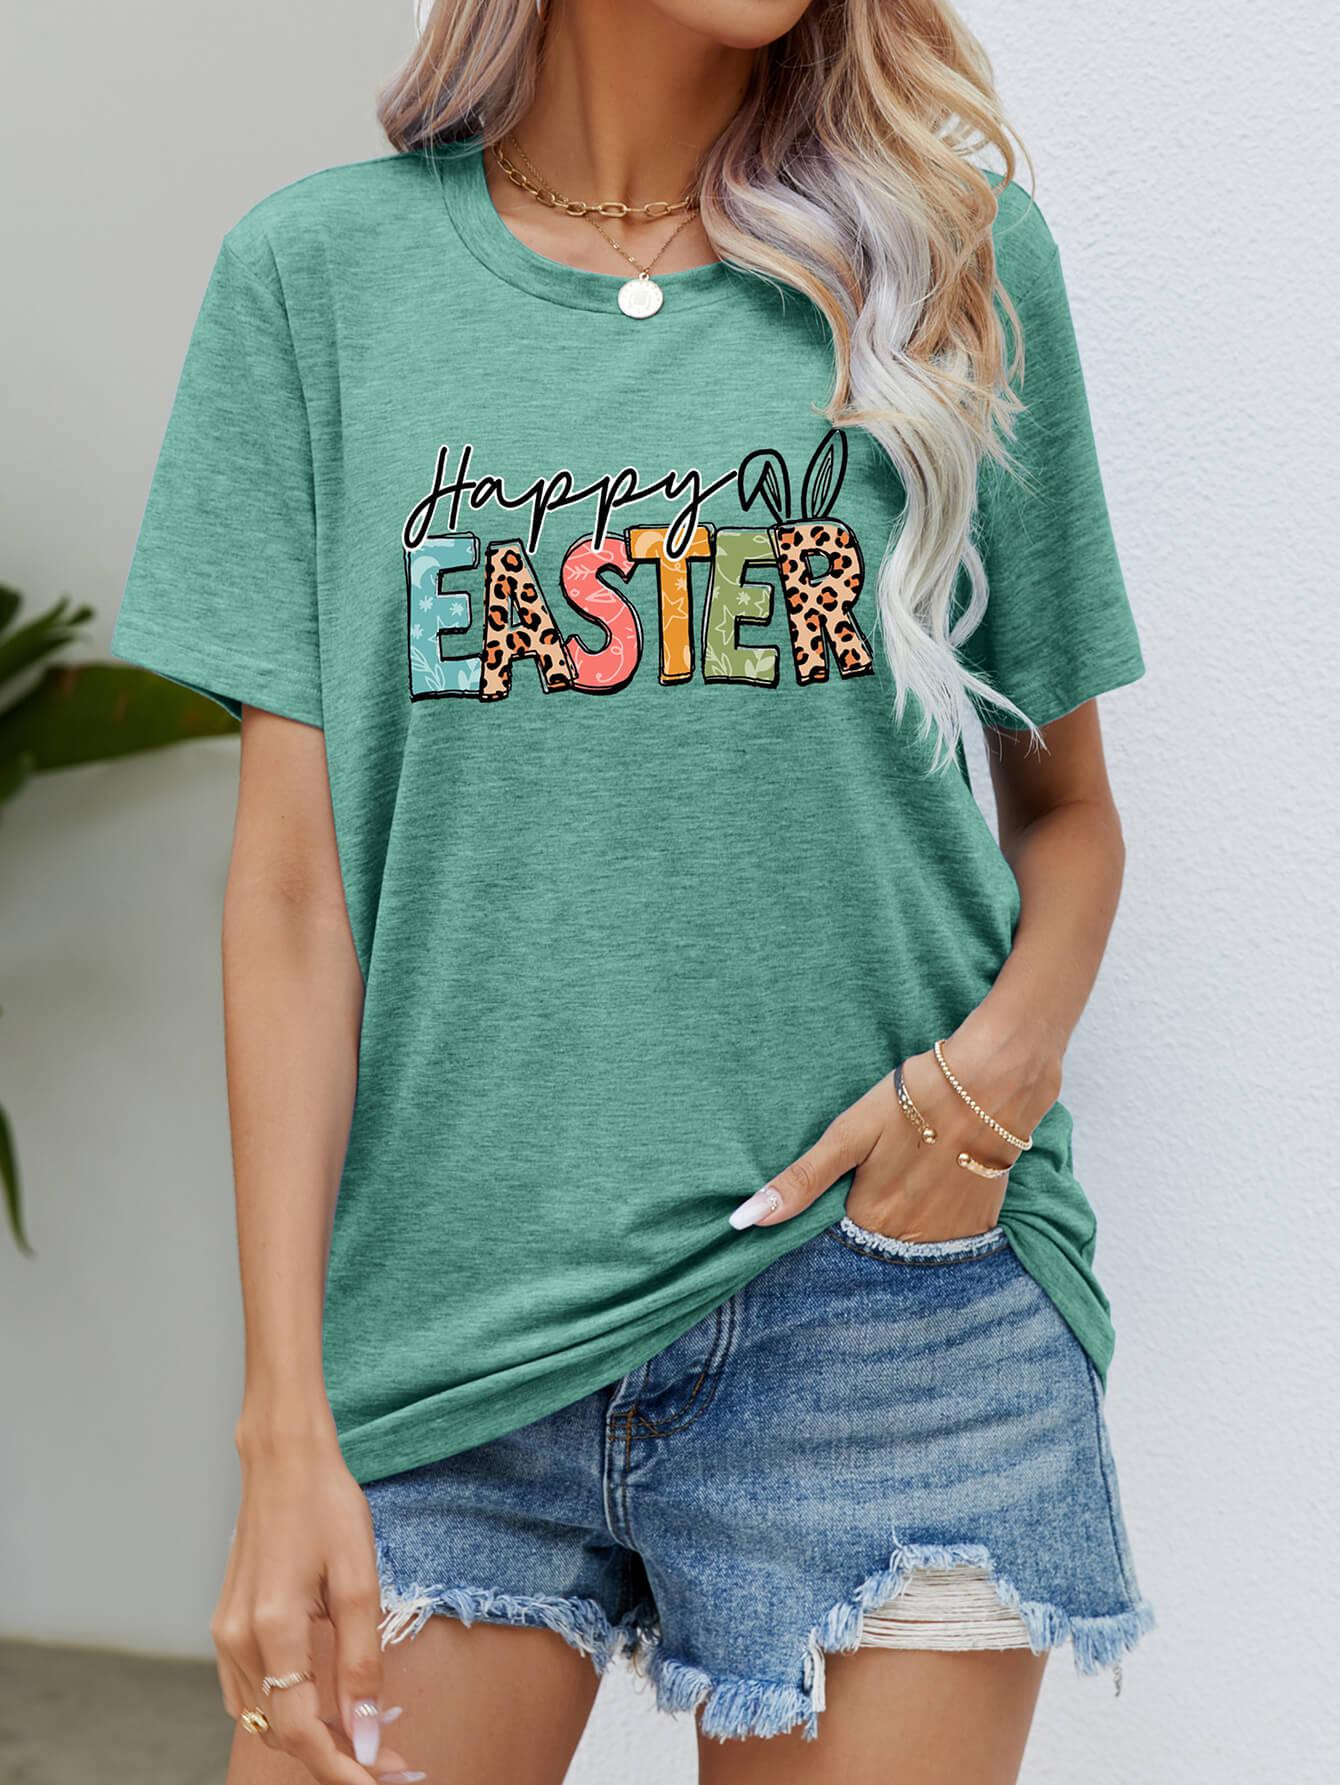 HAPPY EASTER Graphic Round Neck Tee Shirt BLUE ZONE PLANET